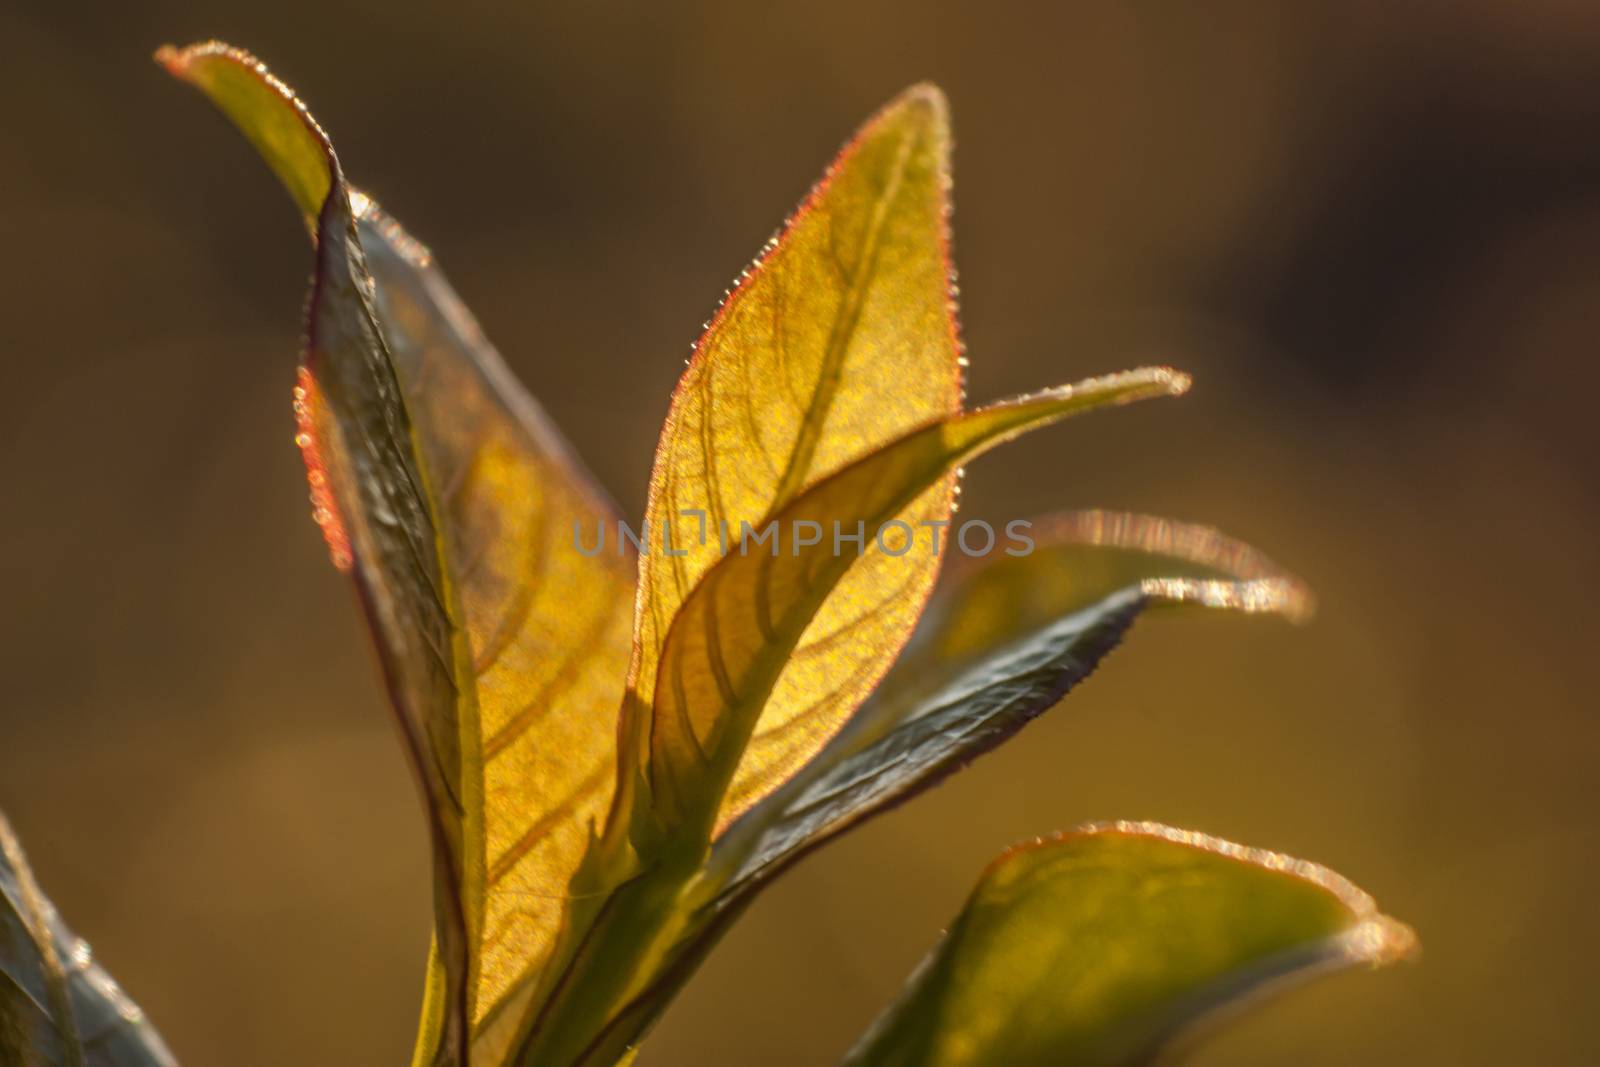 Young small leaves lit by the spring sunshine, in a typical vegetation of northern Italy.